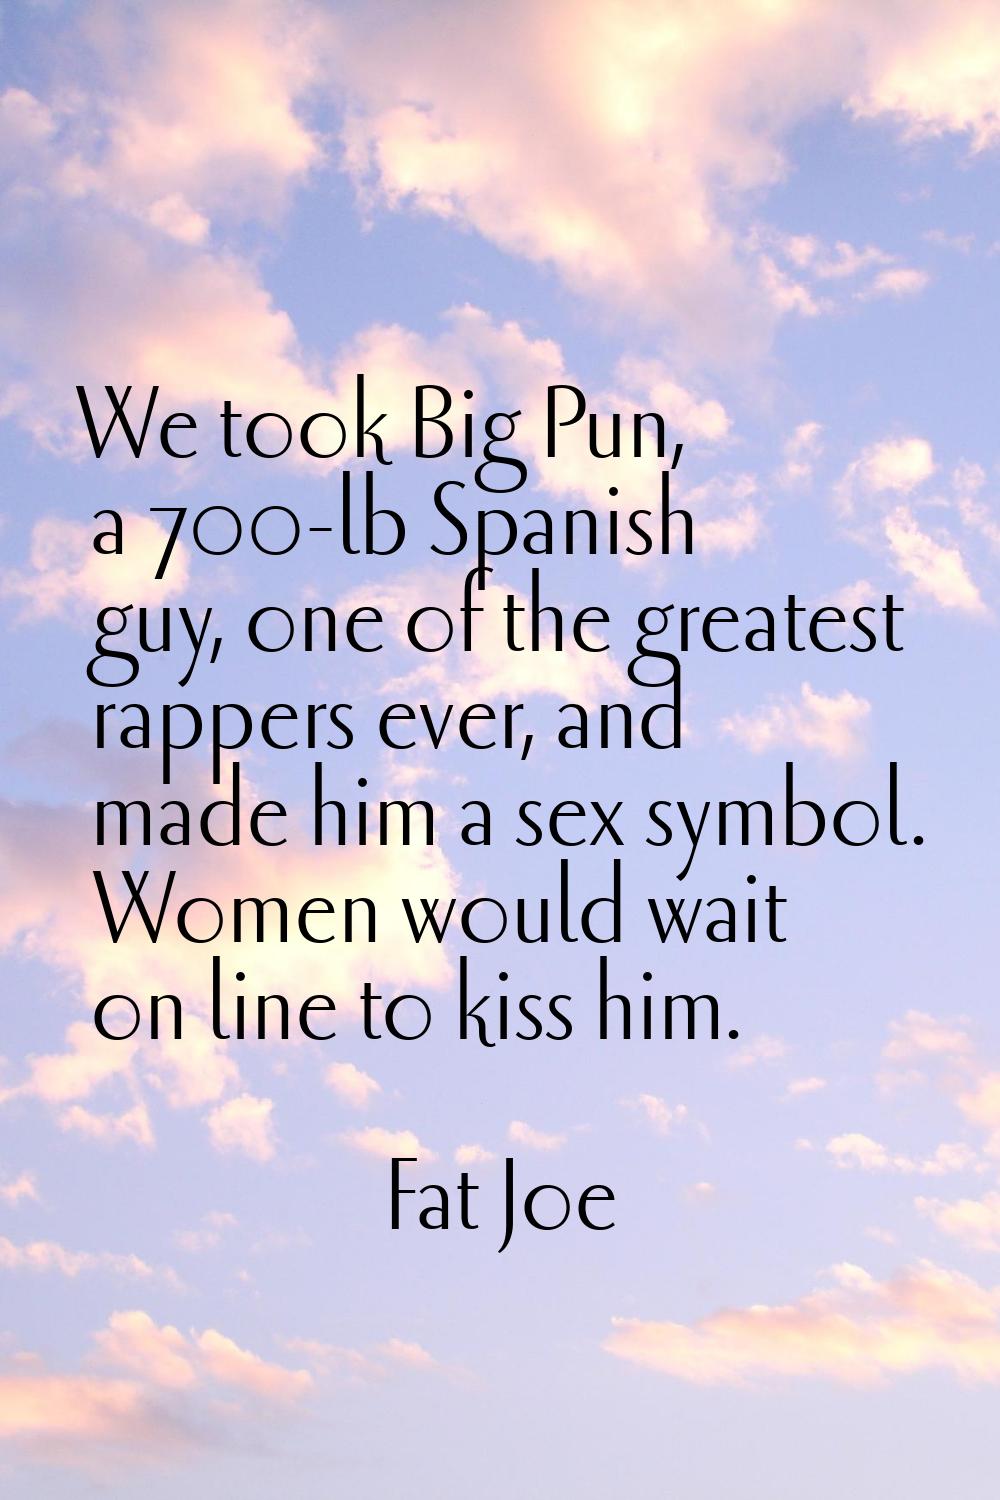 We took Big Pun, a 700-lb Spanish guy, one of the greatest rappers ever, and made him a sex symbol.